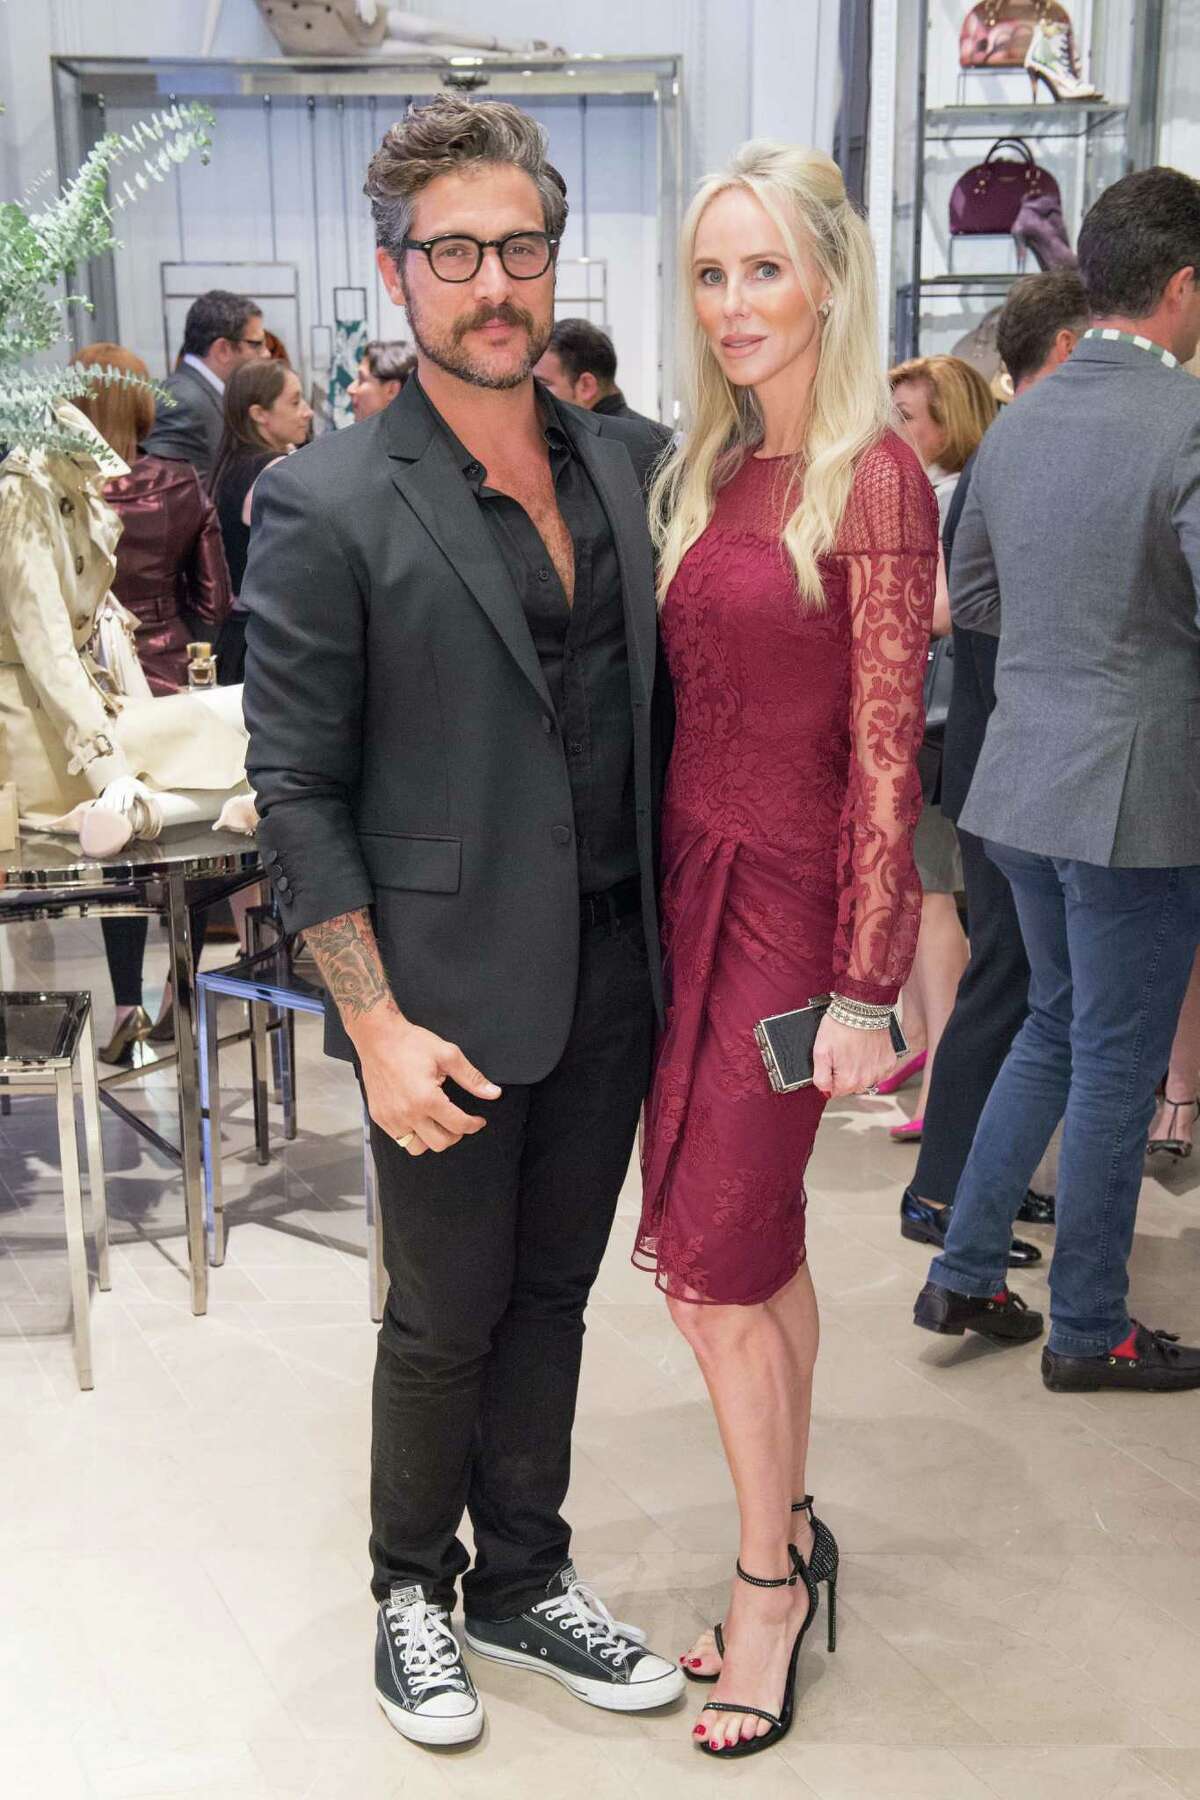 Douglas Friedman and Vanessa Getty at the reopening celebration for Burberry's flagship store in San Francisco on October 7, 2014.